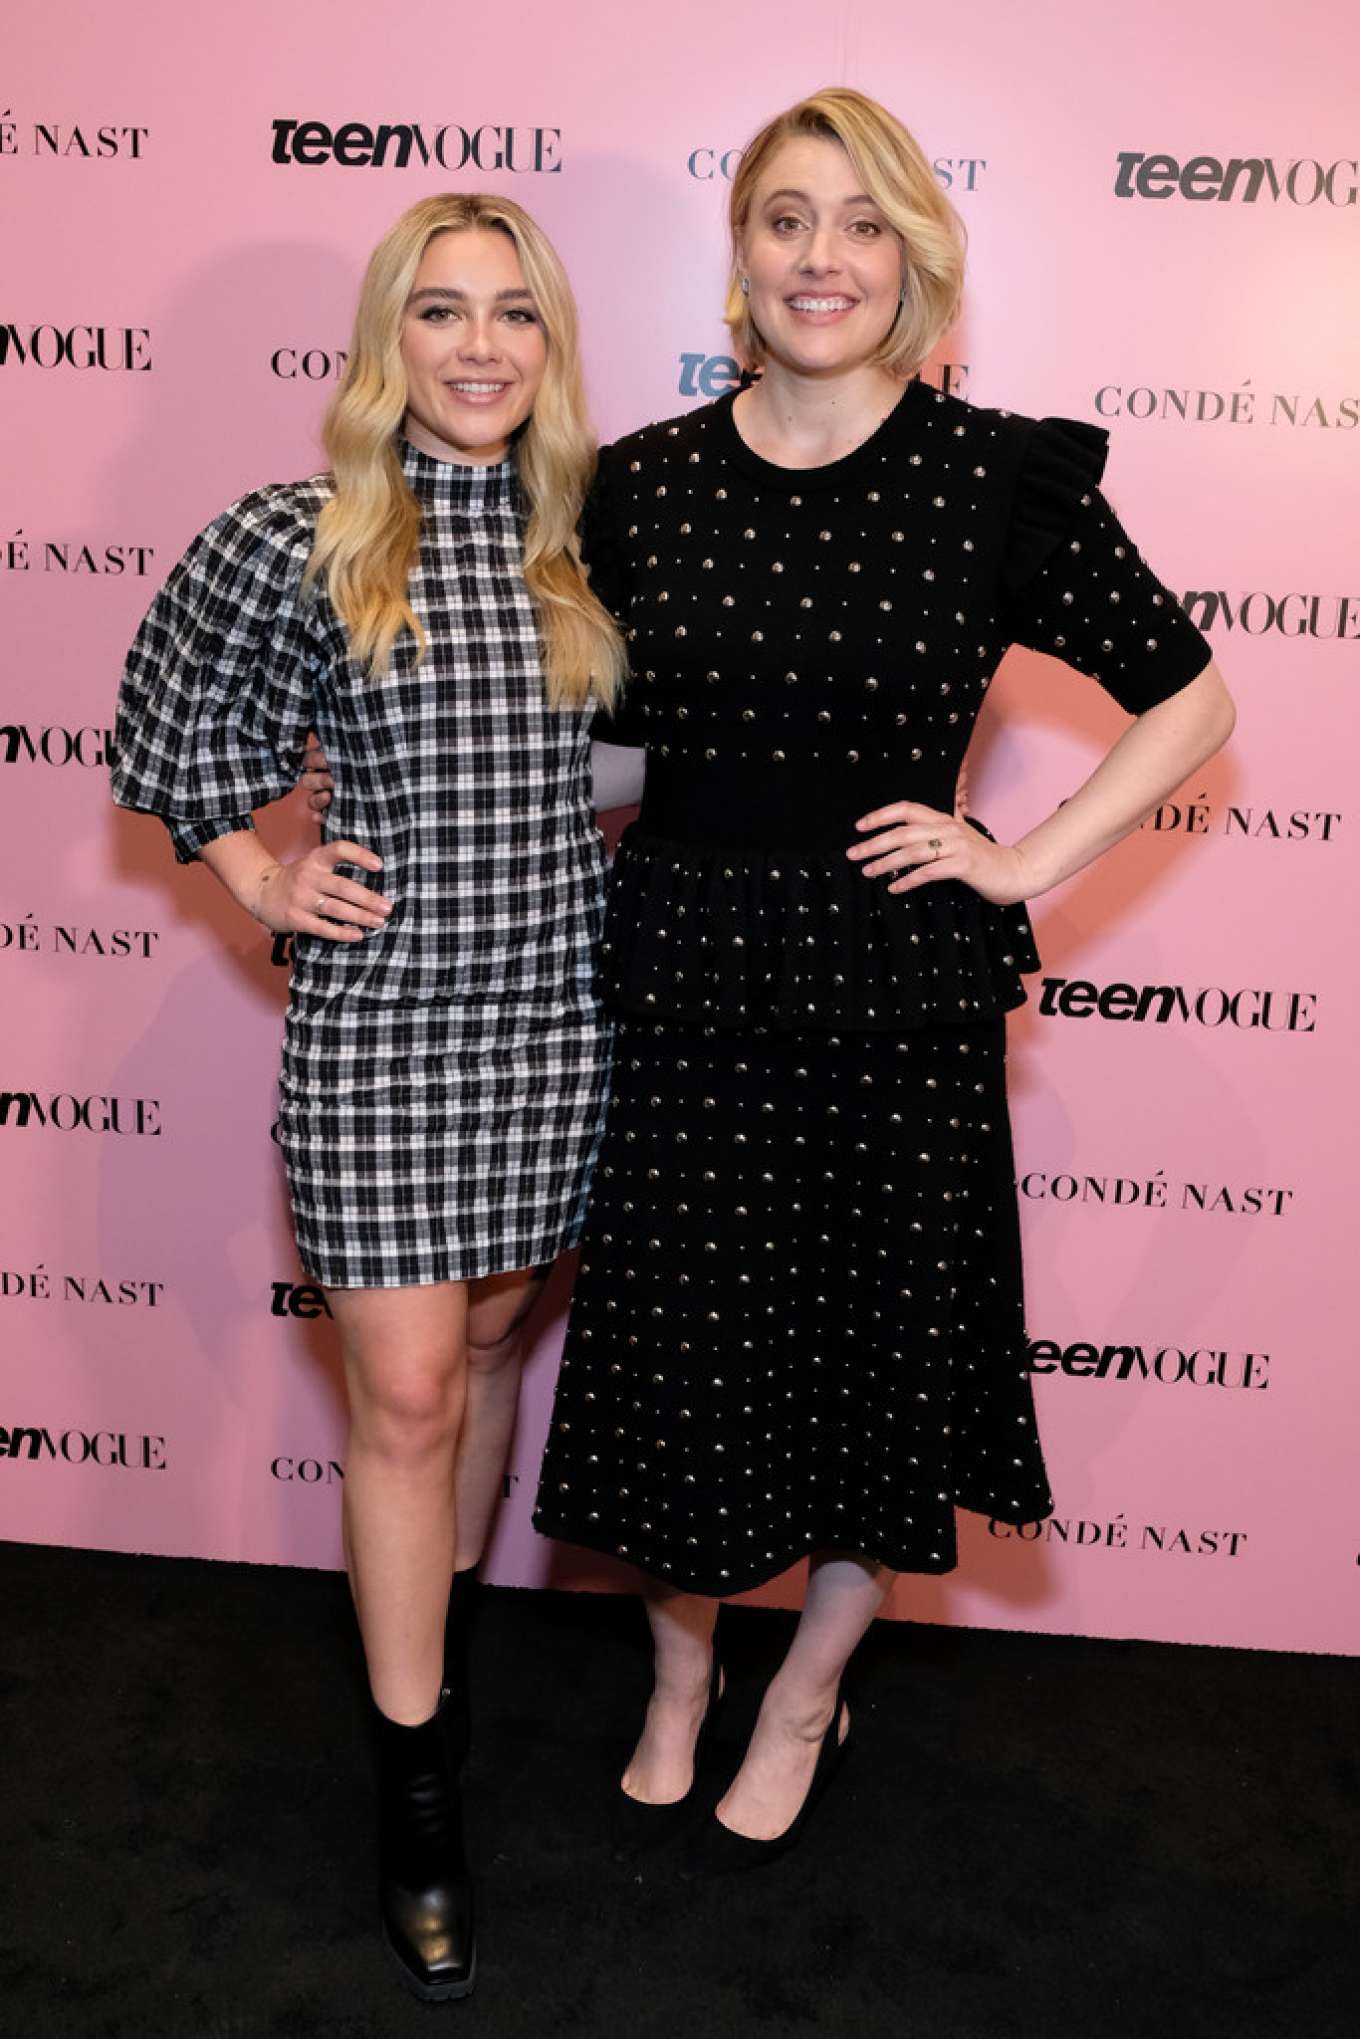 Florence Pugh and Greta Gerwig - The Teen Vogue Summit 2019 in Los Angeles